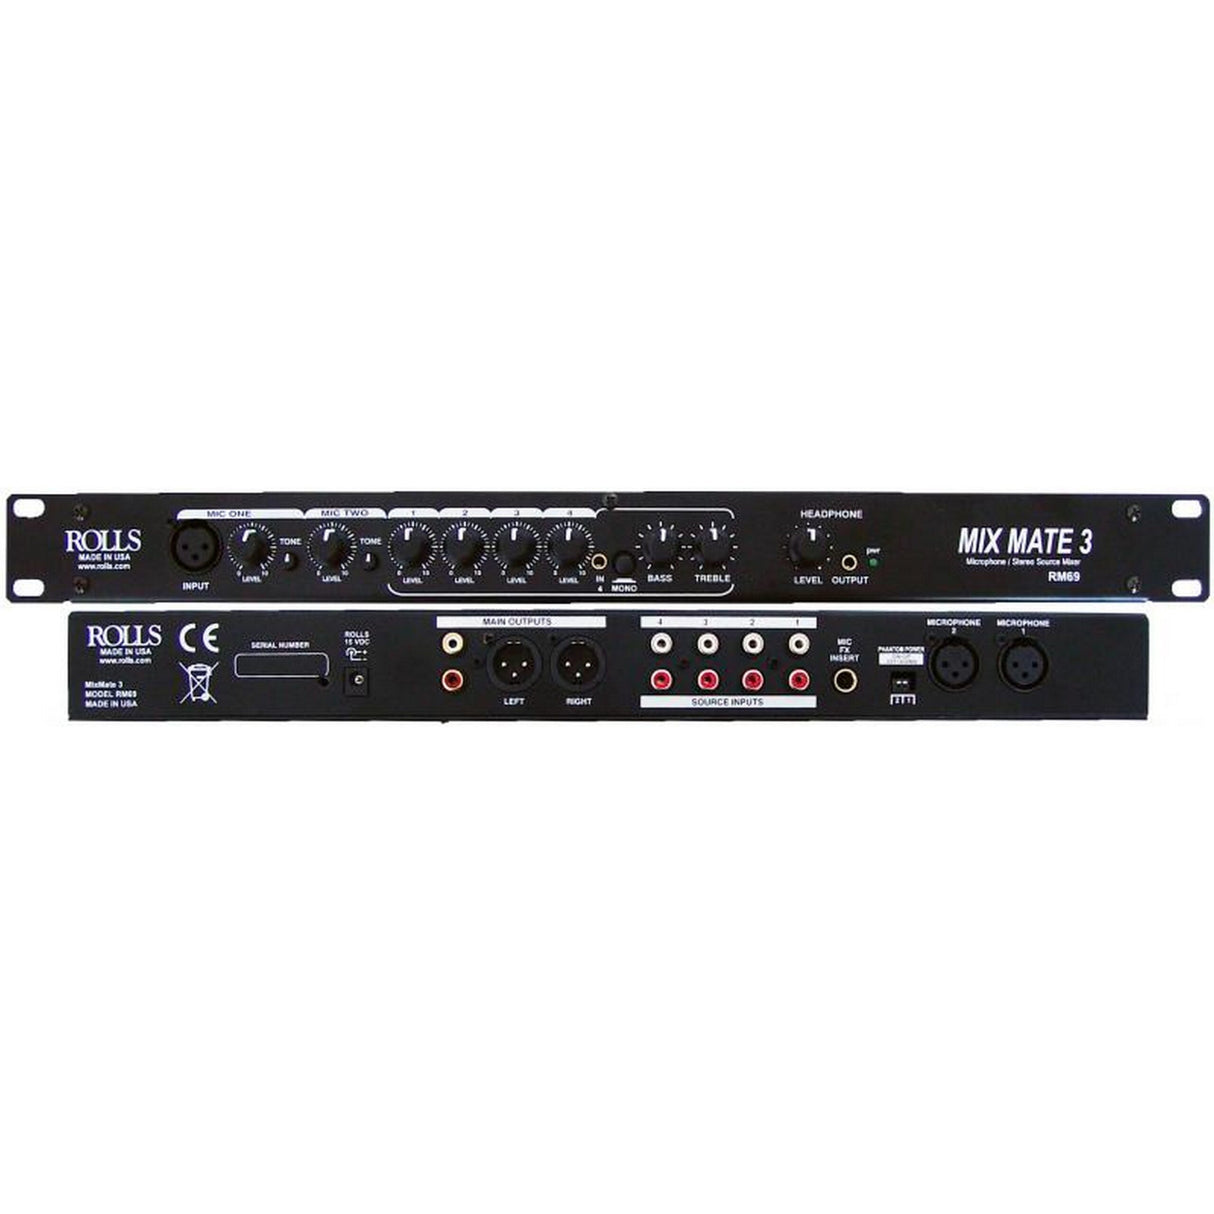 Rolls RM69 Mix Rate 3 Electronic Audio Mixer, 6 Channel